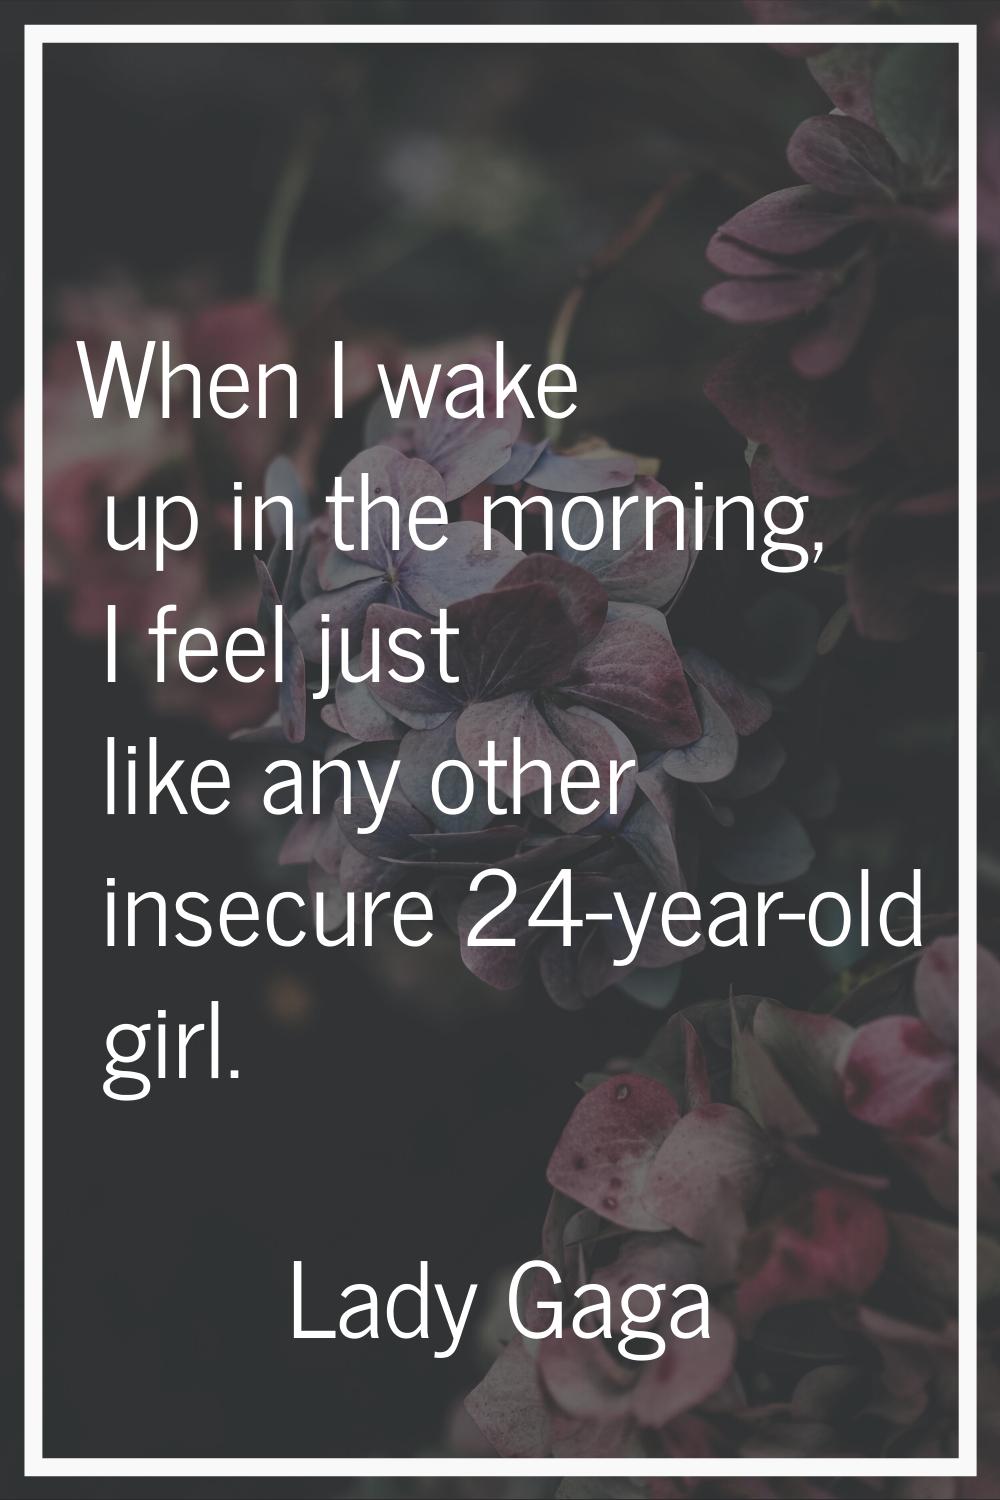 When I wake up in the morning, I feel just like any other insecure 24-year-old girl.